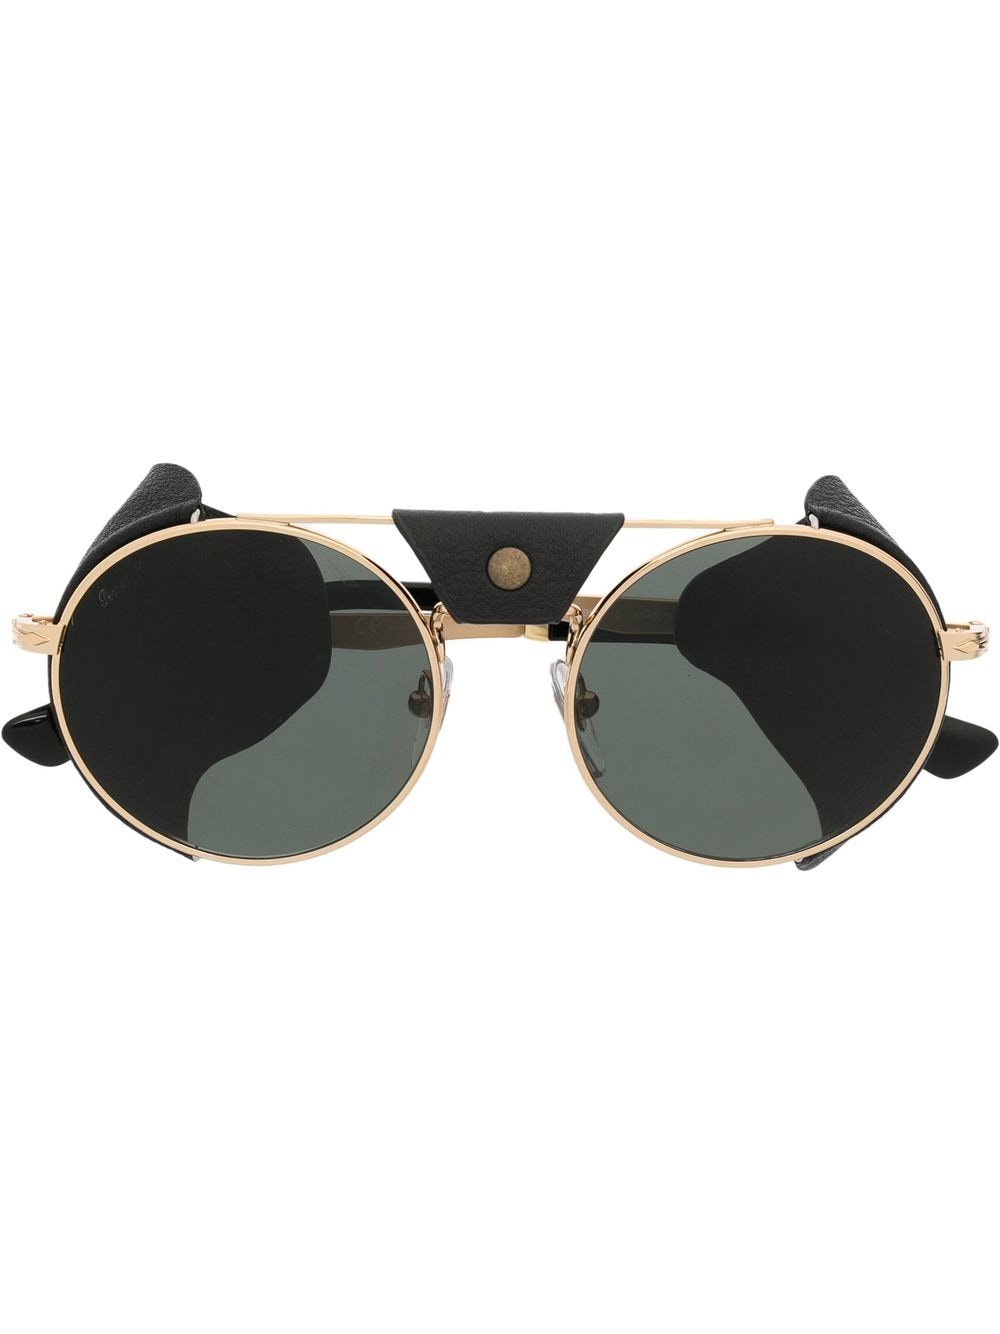 Persol tinted leather-side rounded sunglasses - Gold von Persol